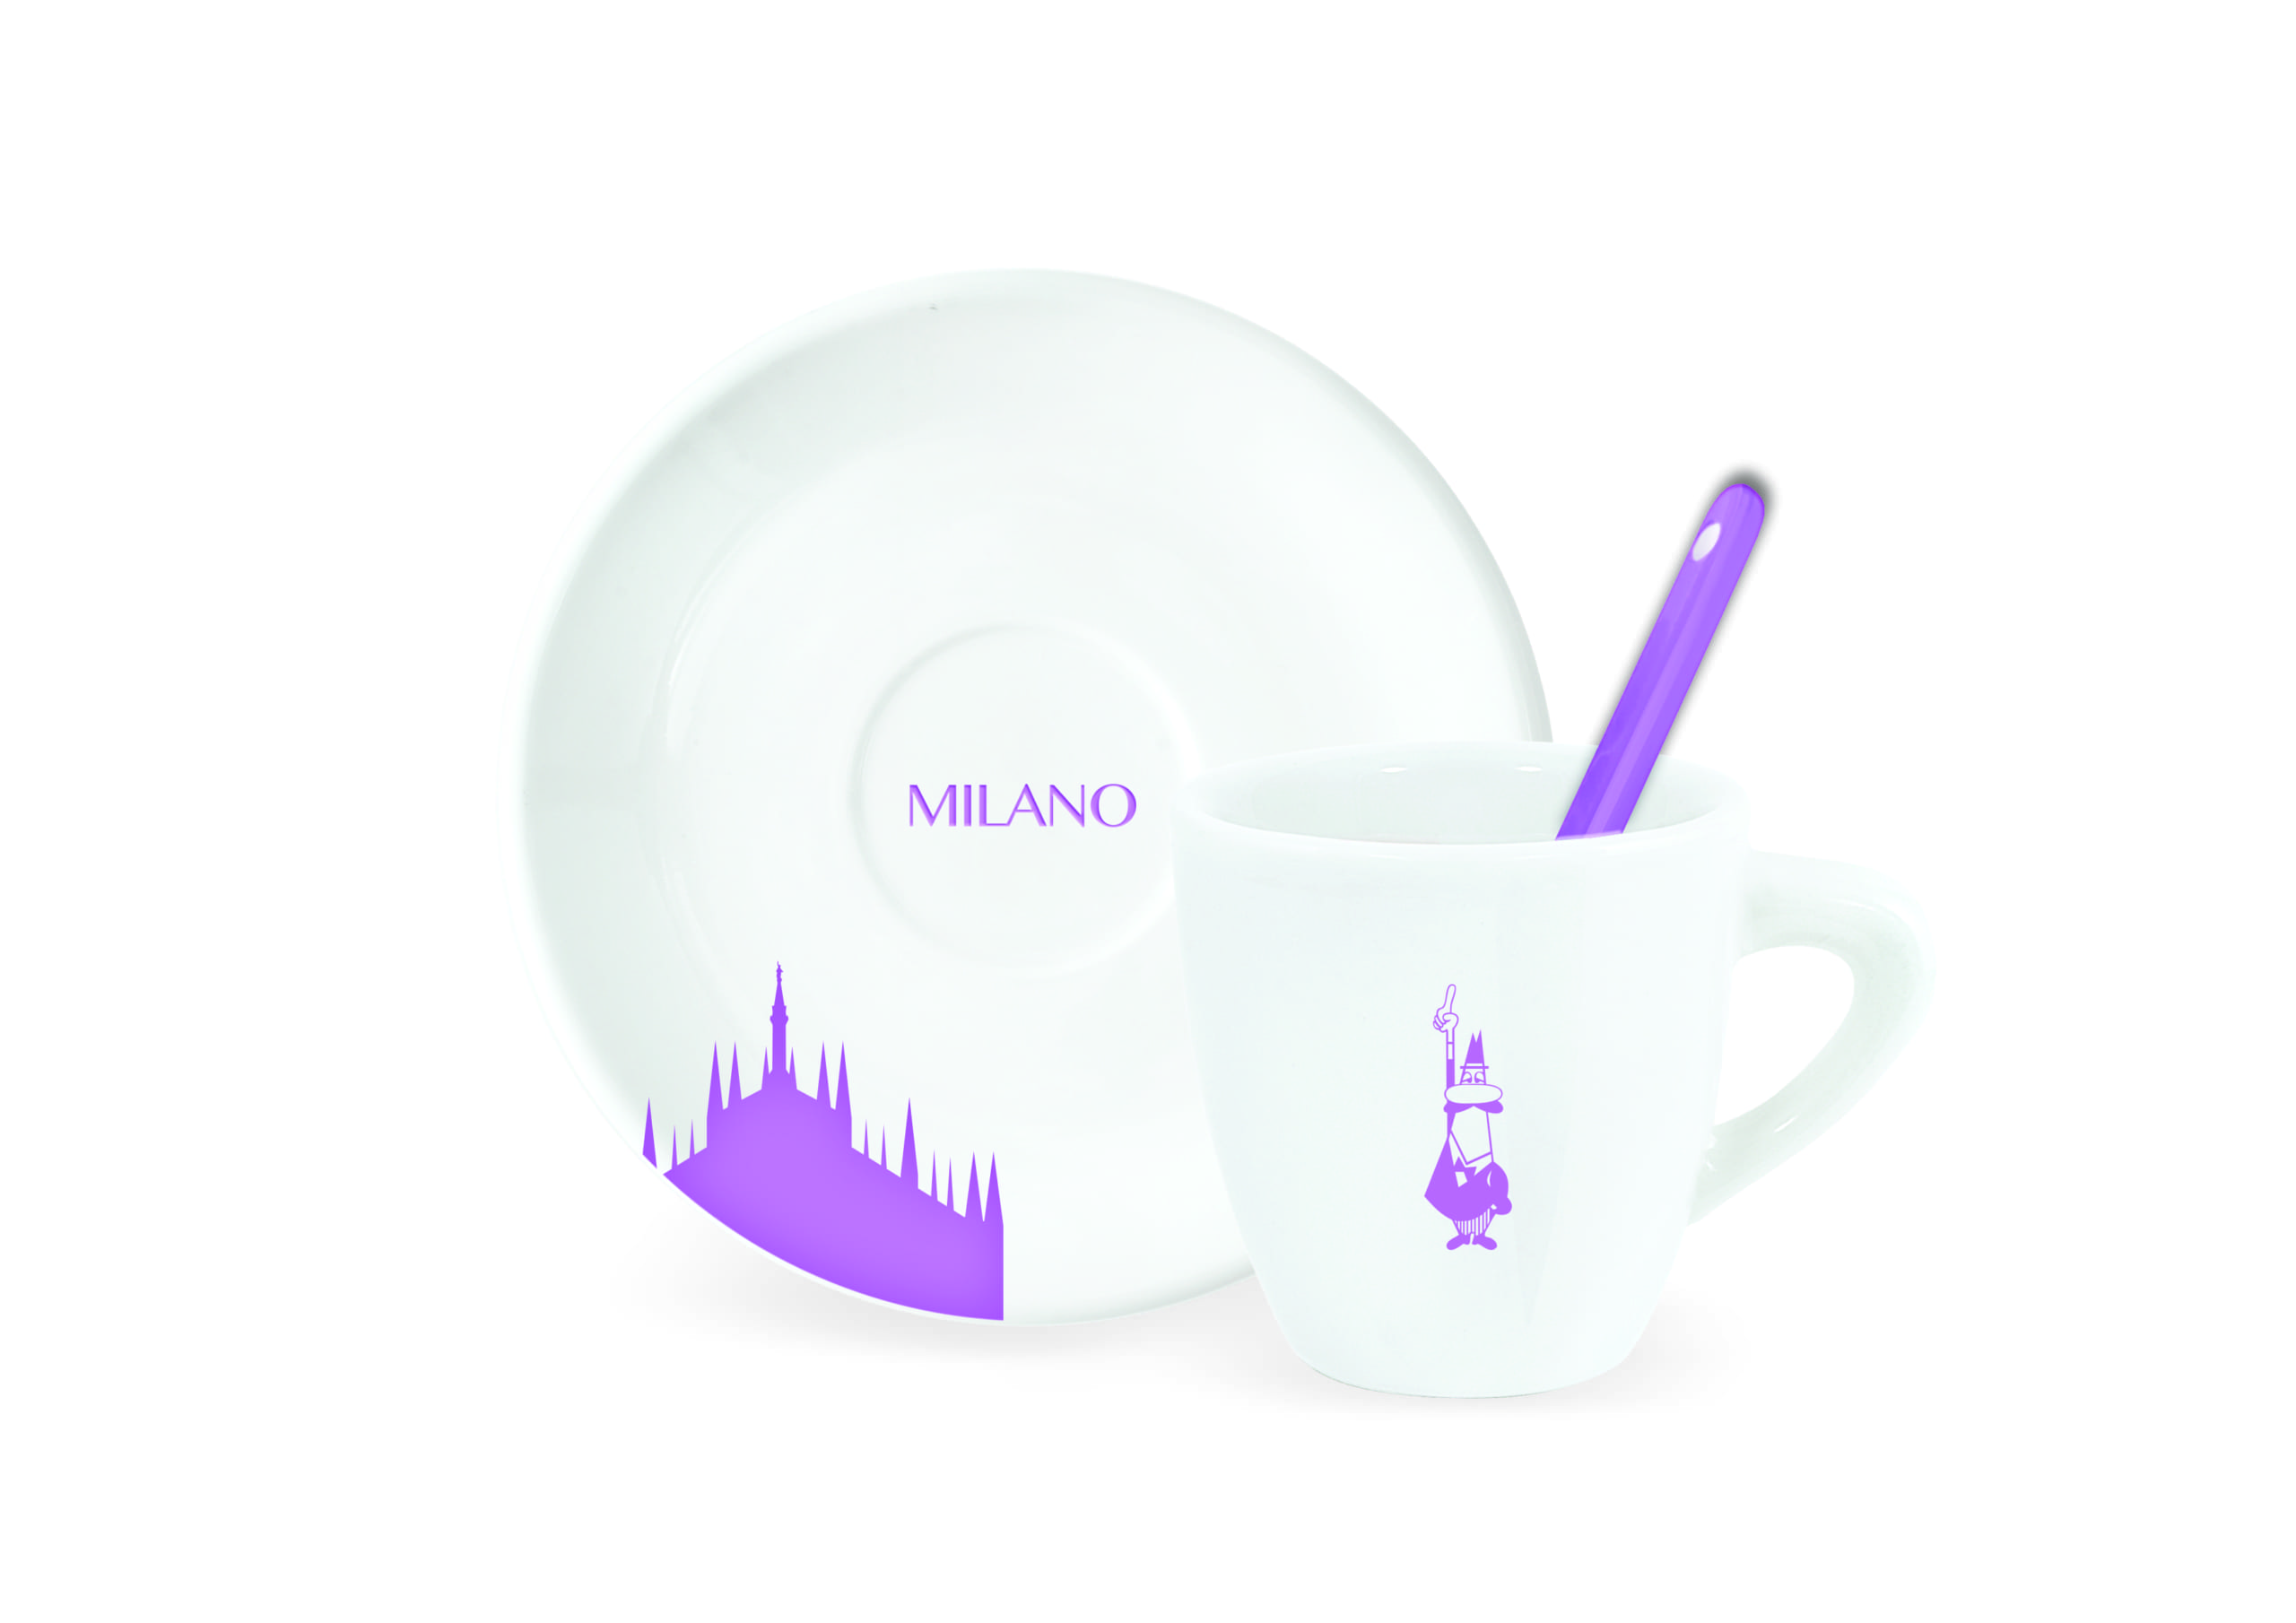 https://cafe7.ie/wp-content/uploads/2020/05/milano_ombra-scaled.jpg